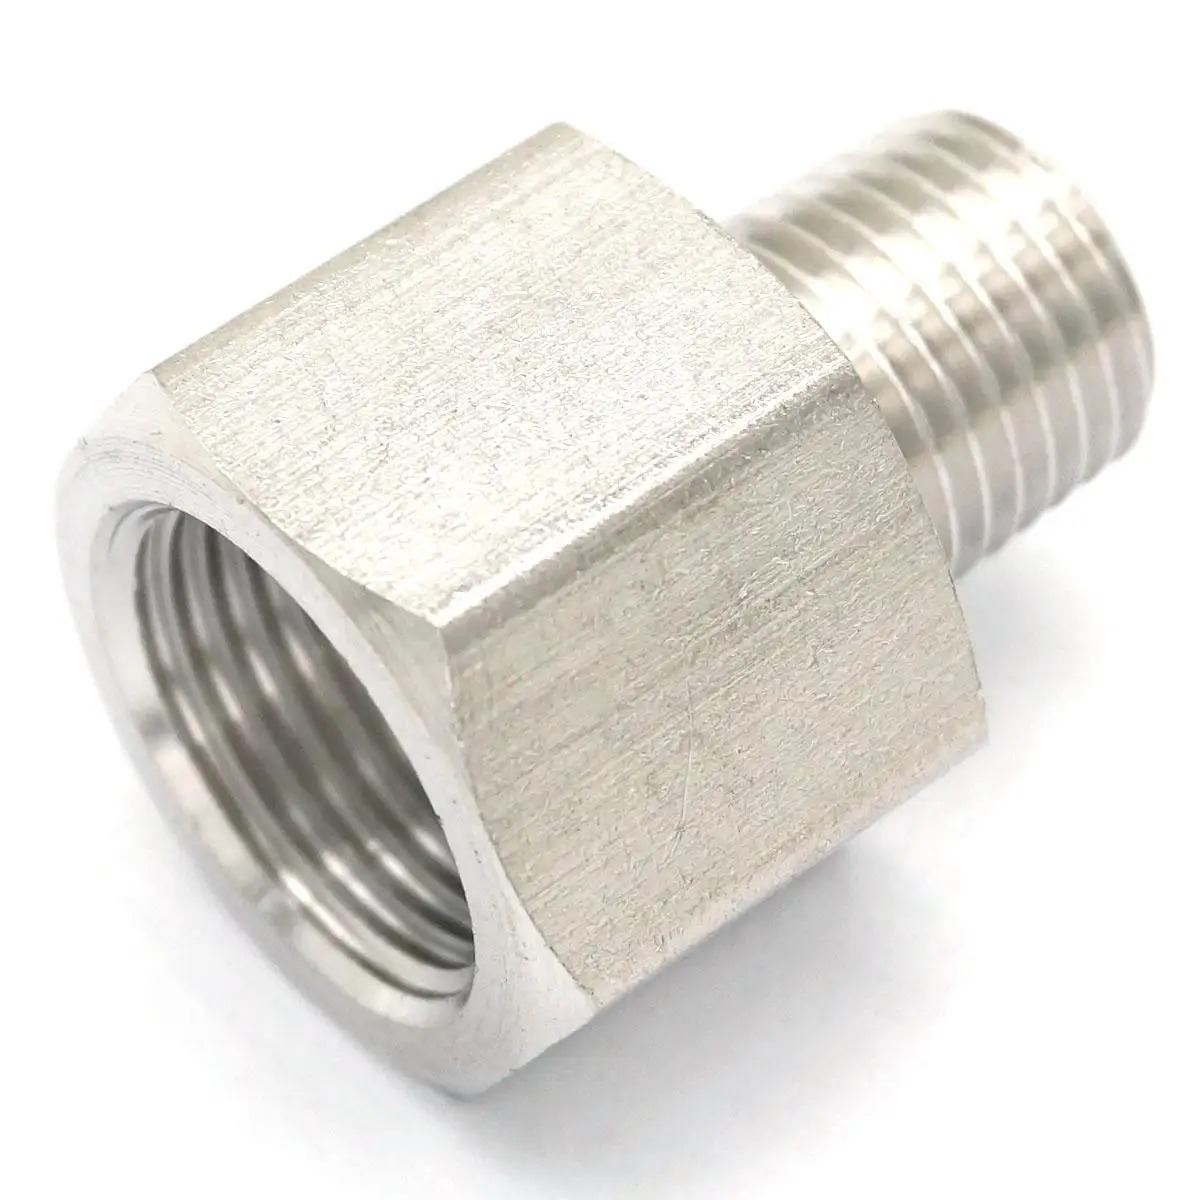 SSCAP20 1.1/4" BSPP Female Cap Stainless Steel Fitting 